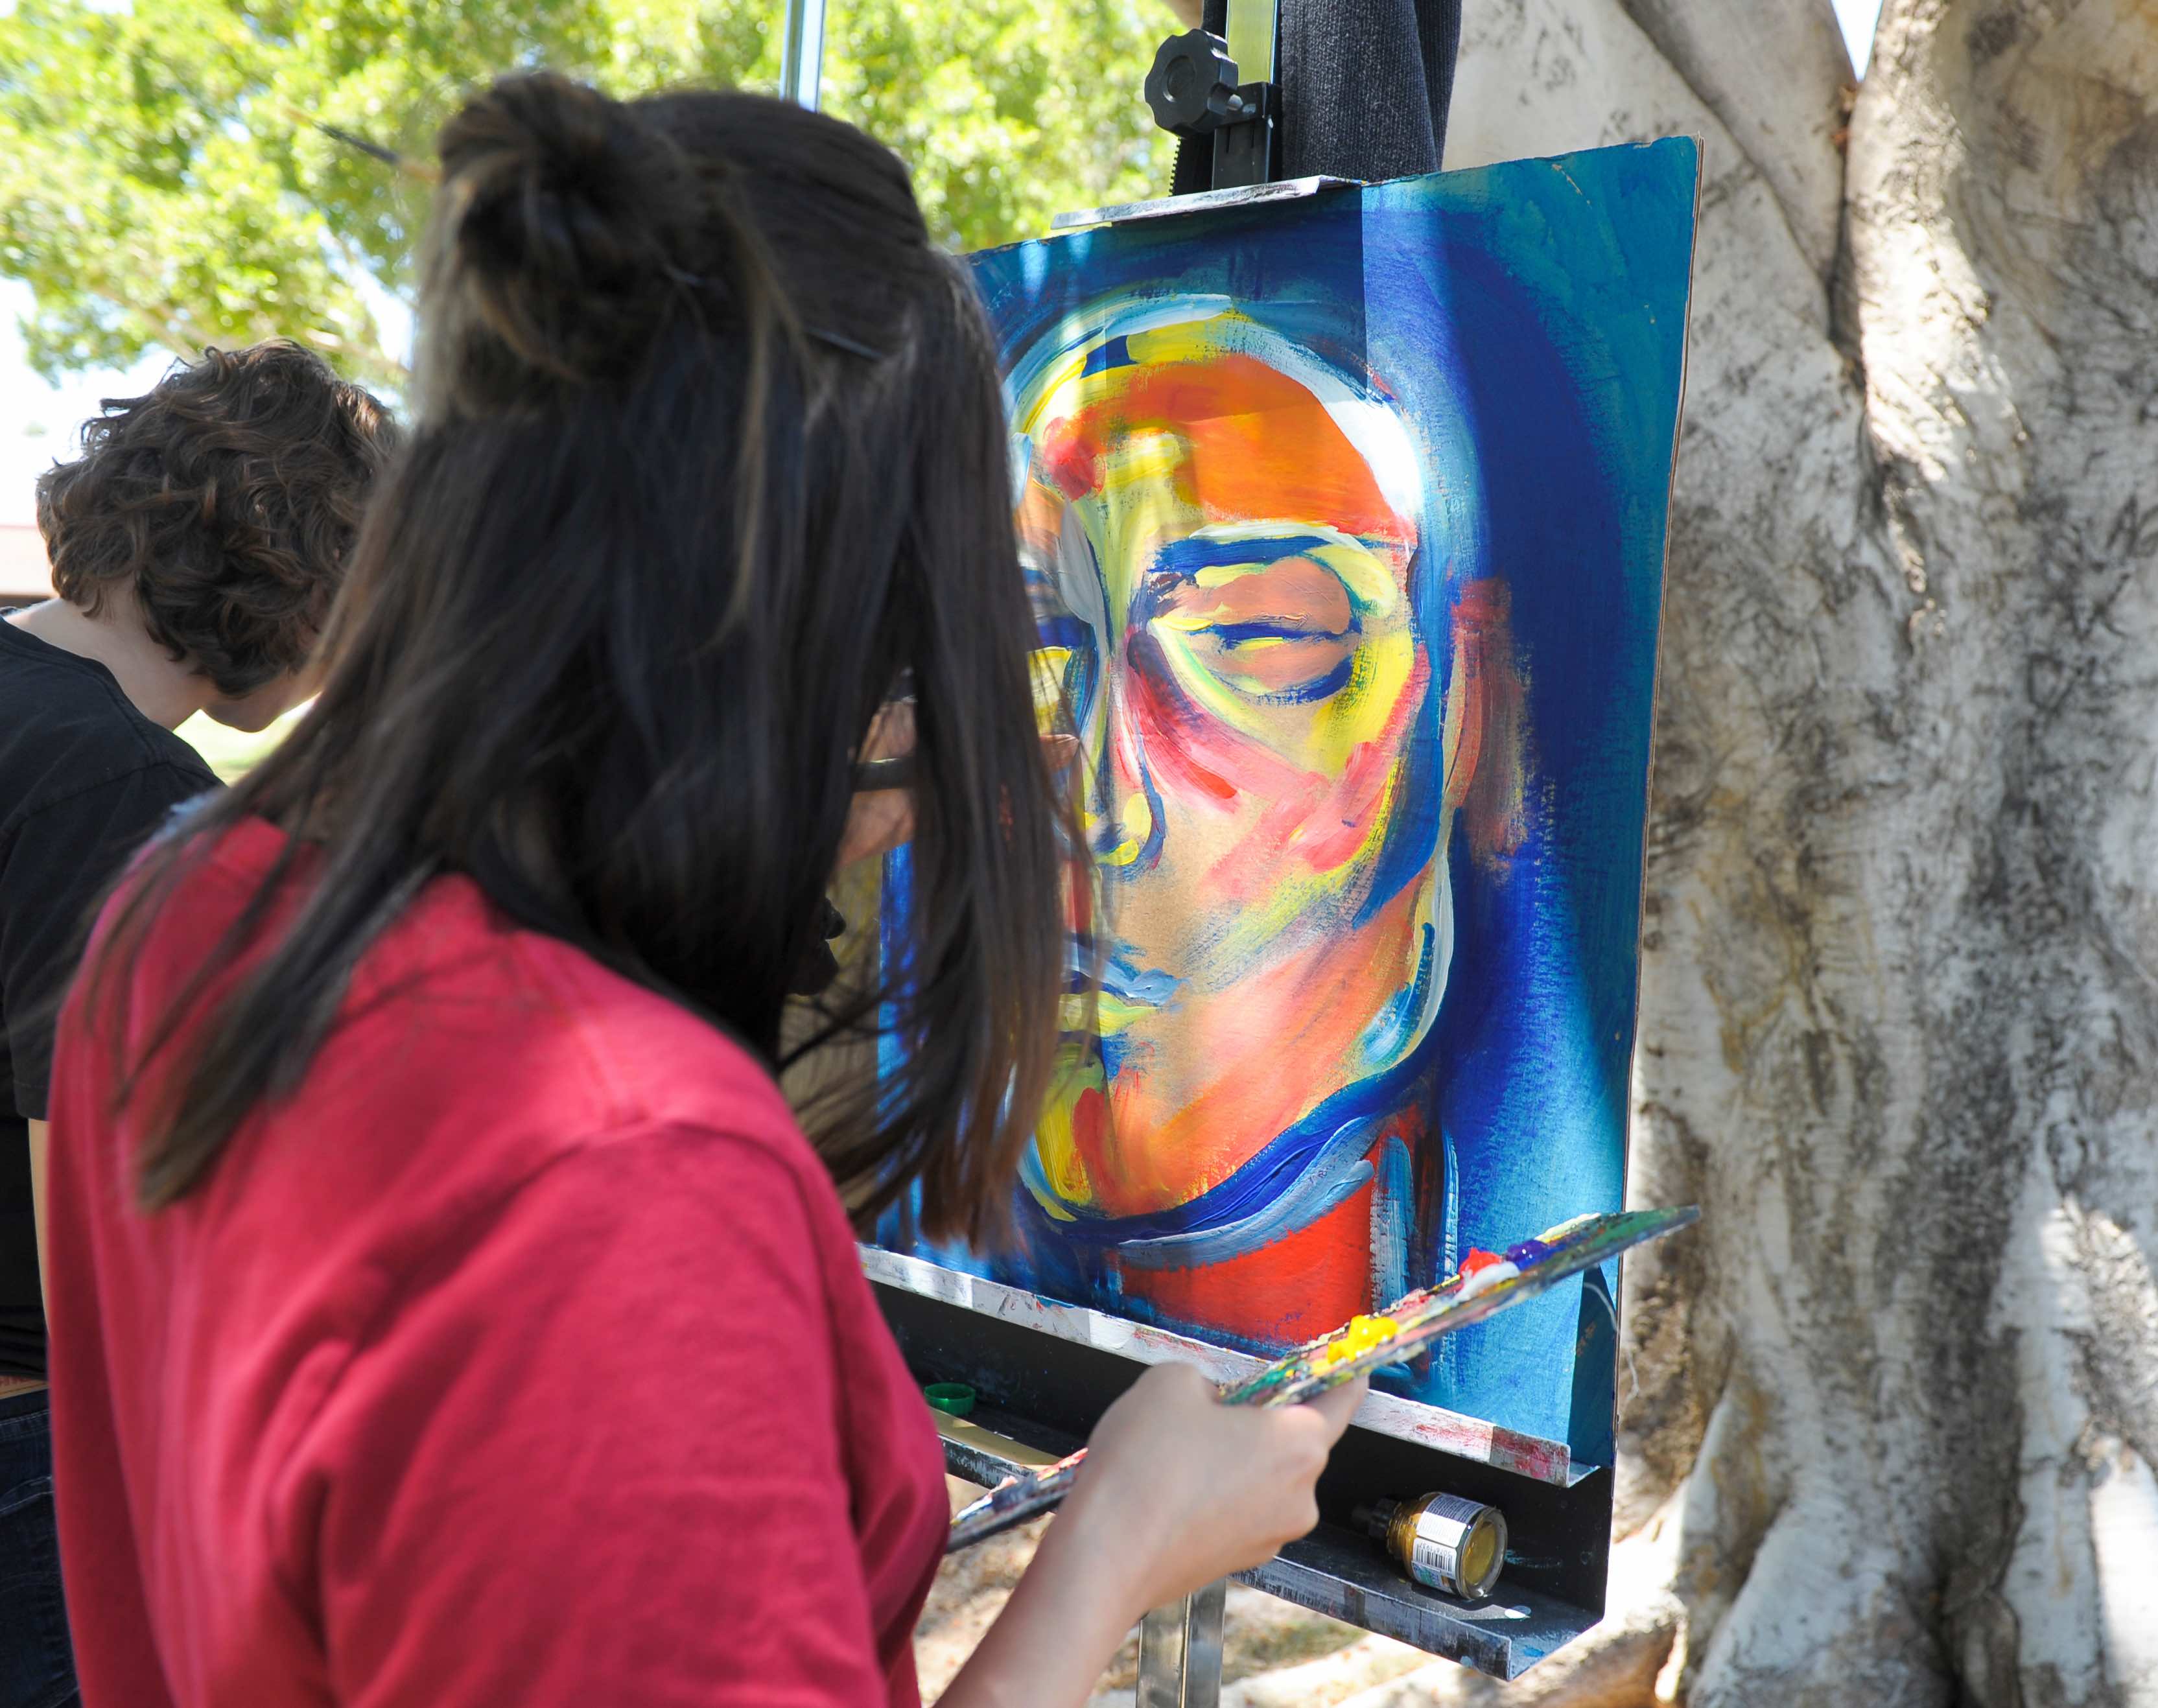 A person in red is standing outside painting on a canvas which is already blue with an orange face 